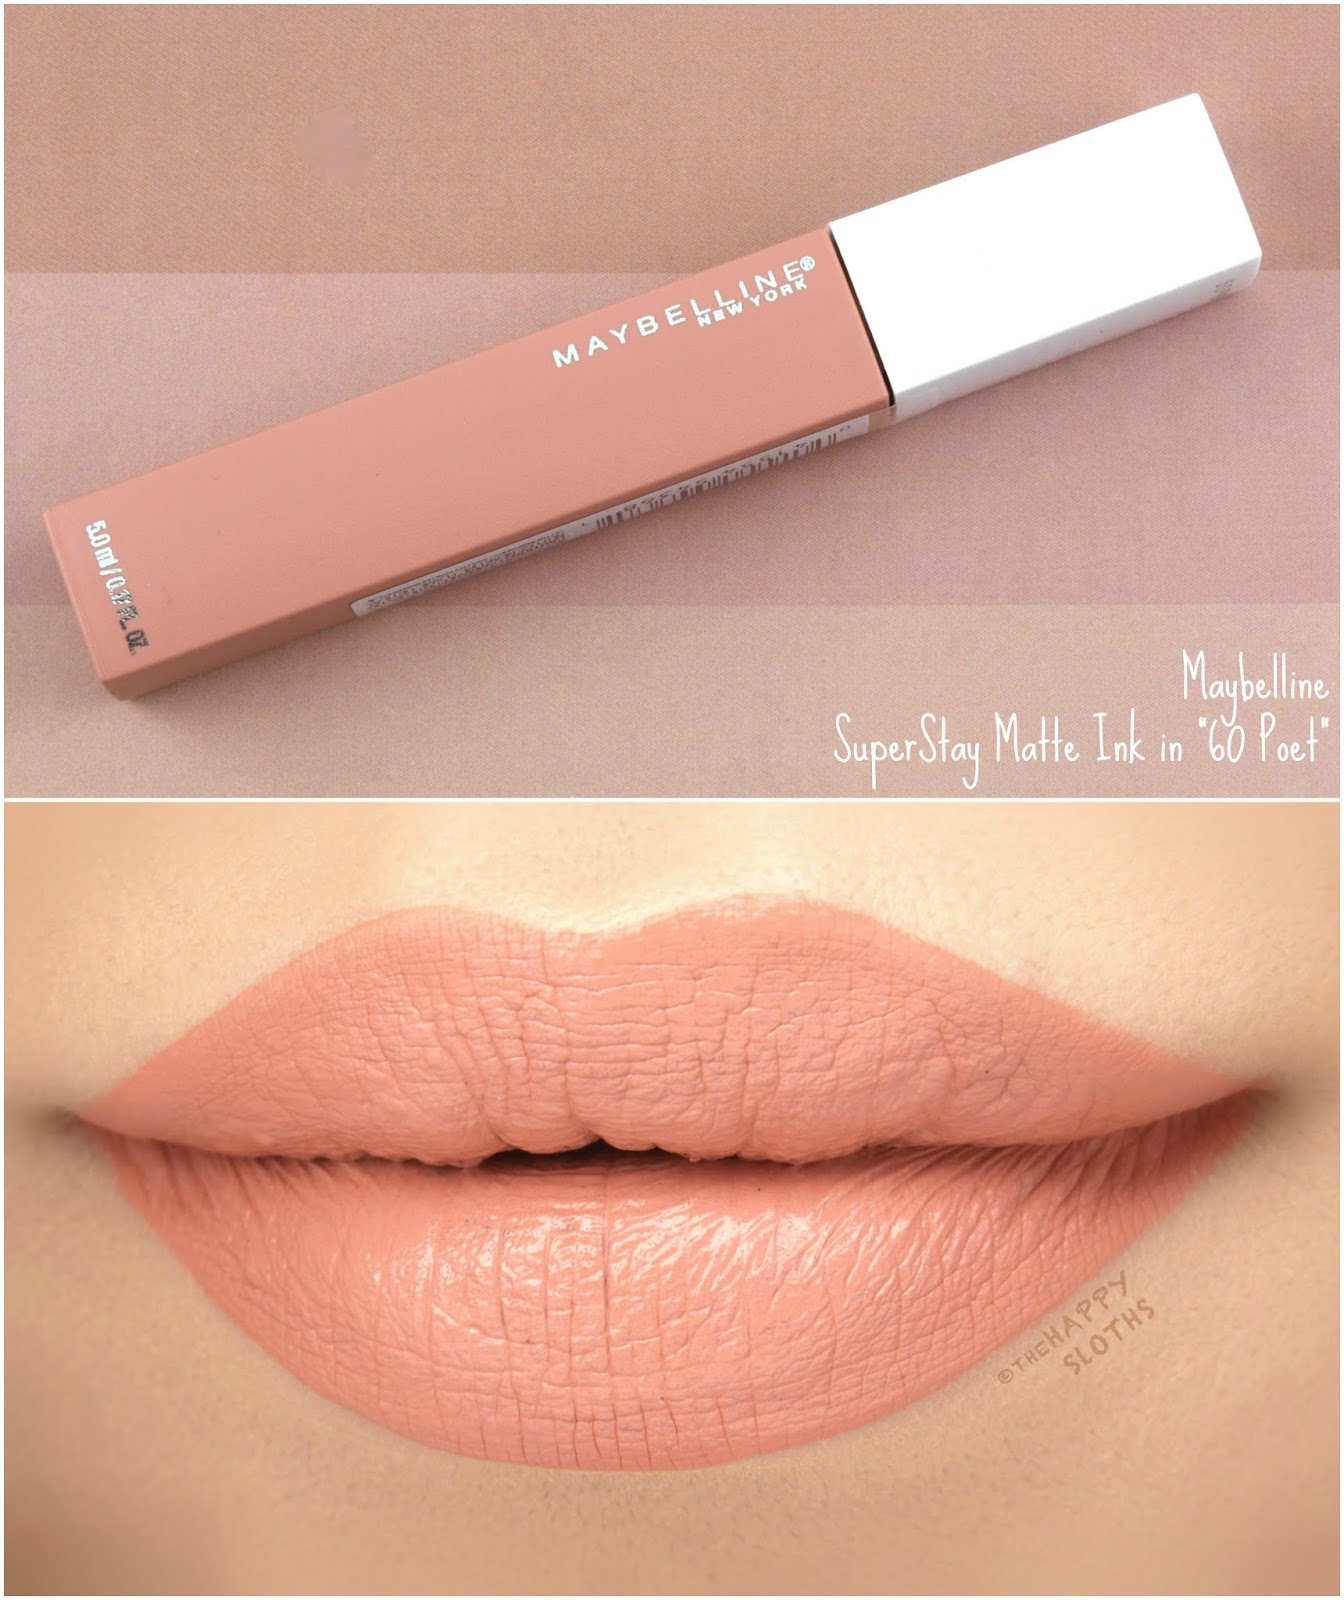 Maybelline | SuperStay Matte Ink "60 Poet": Review and Swatches